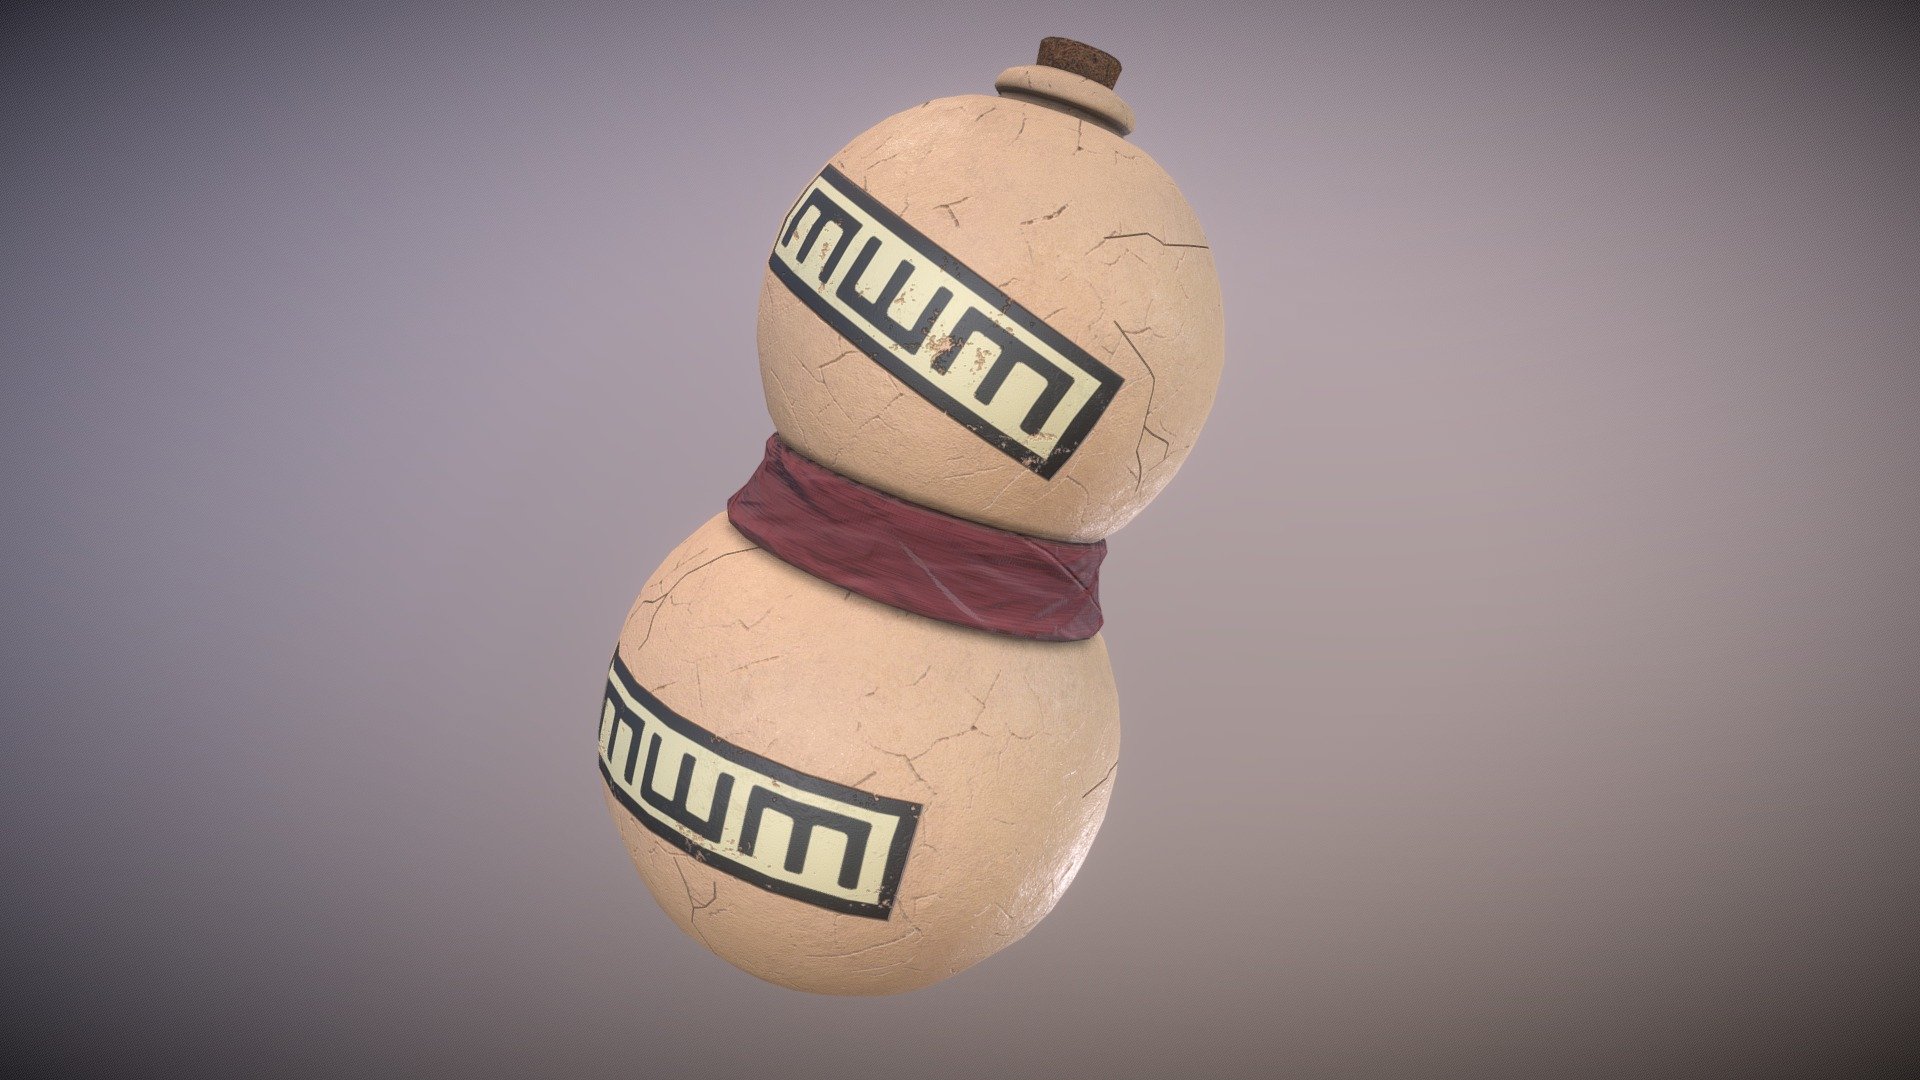 Gaara's gourd from naruto, used to carry weaponized sand.

This is my interpretation of what Gaara's gourd could look like in the real world if it were made from realistic materials. The gourd is made of clay, with the cloth band in the middle consisting of a silk-like fabric. I assumed the symbols around the gourd to be talismans, and gave them the appearance of being &ldquo;stuck on